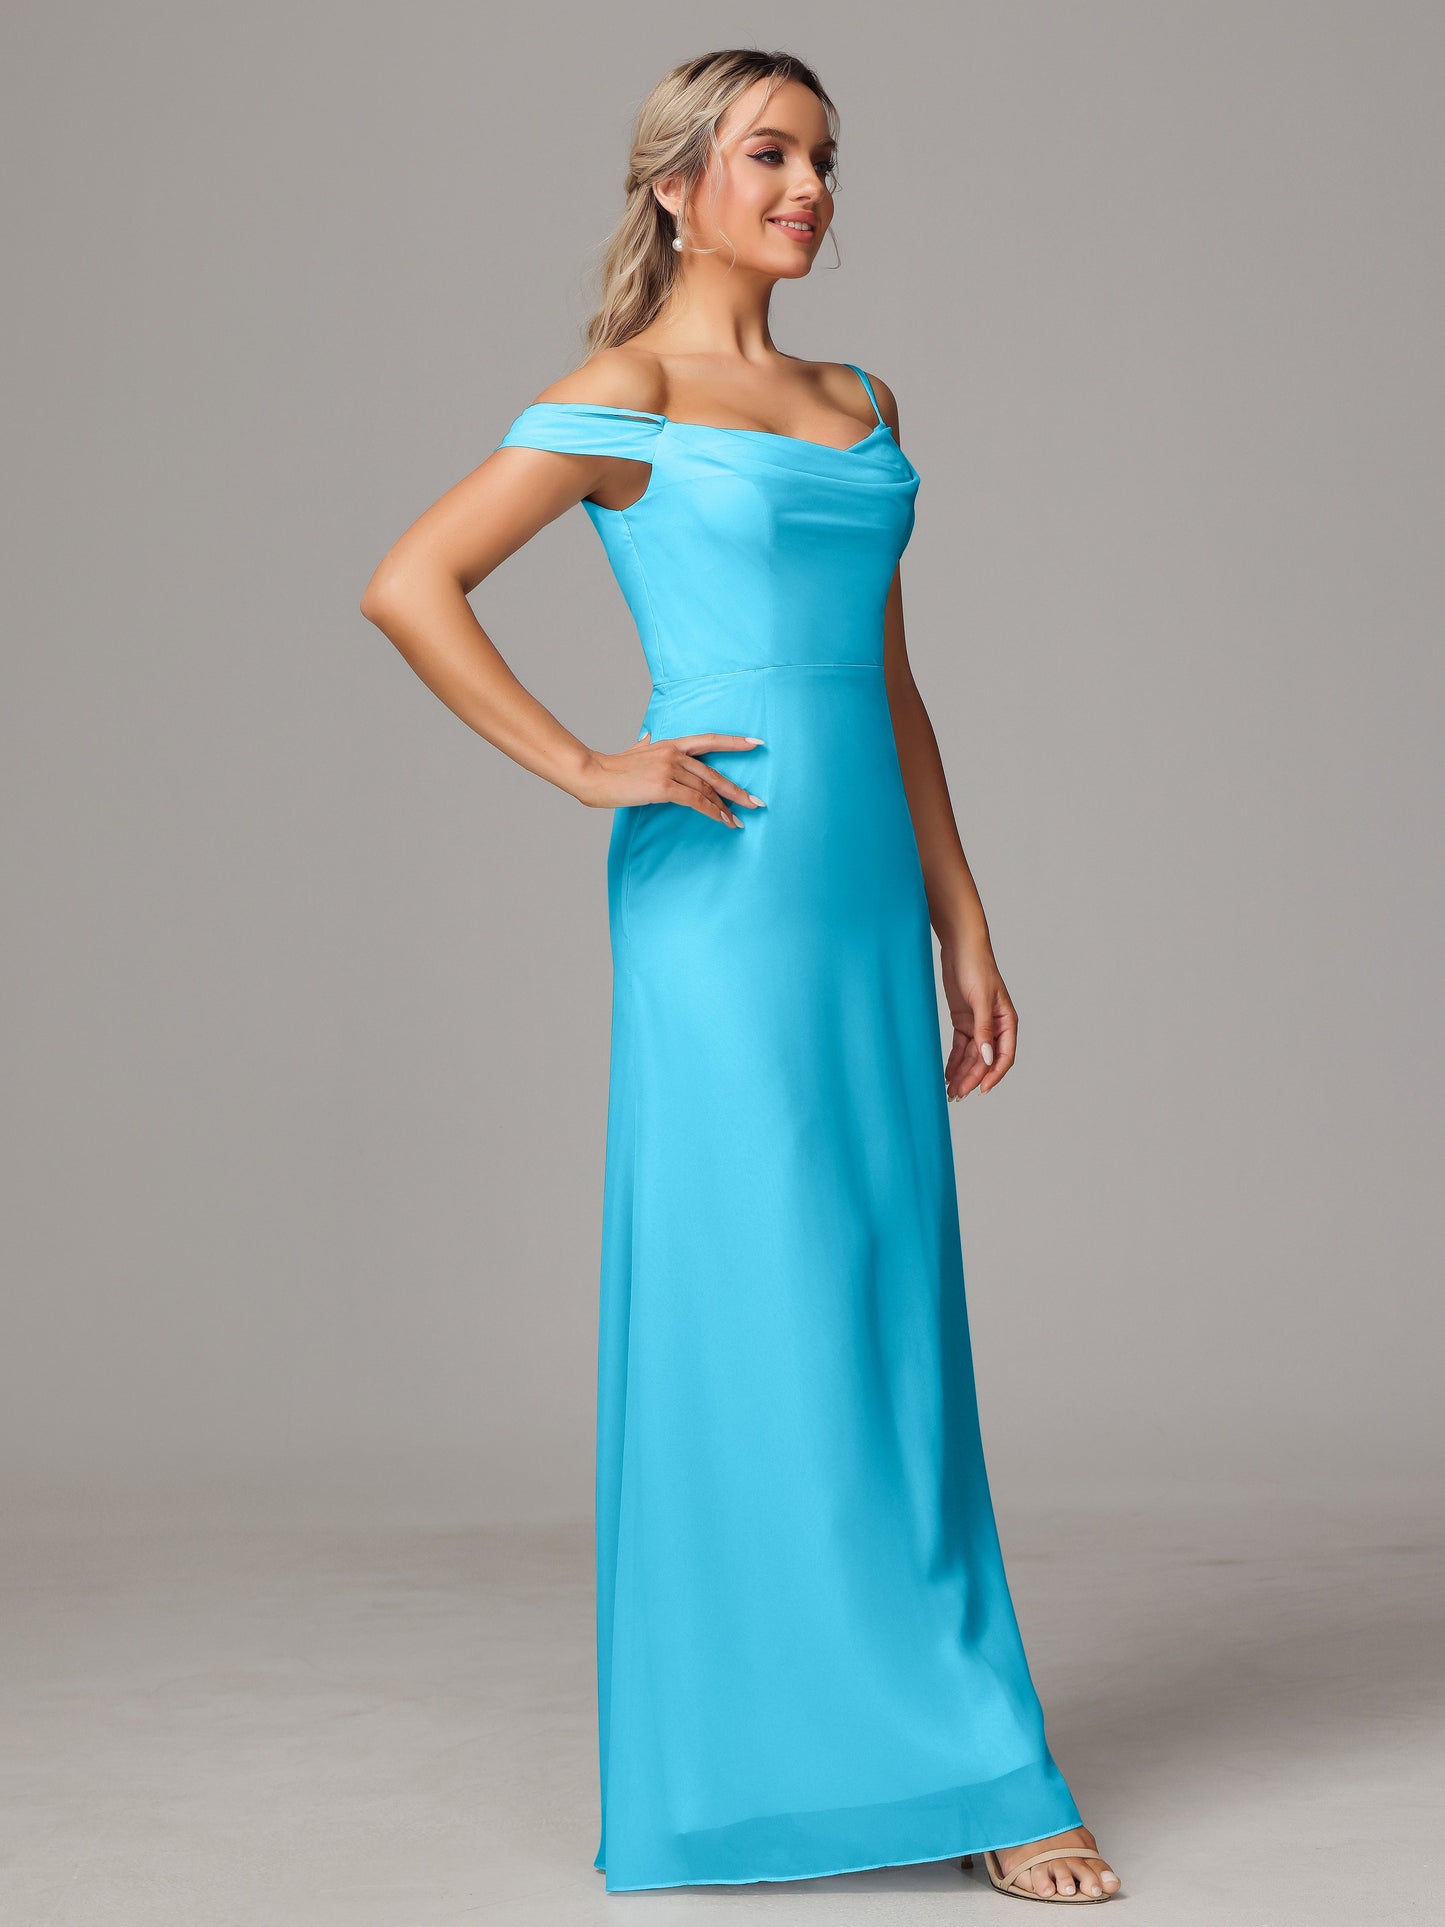 Spaghetti Straps Off The Shoulder Chiffon Wedding Guest Dress With Slit